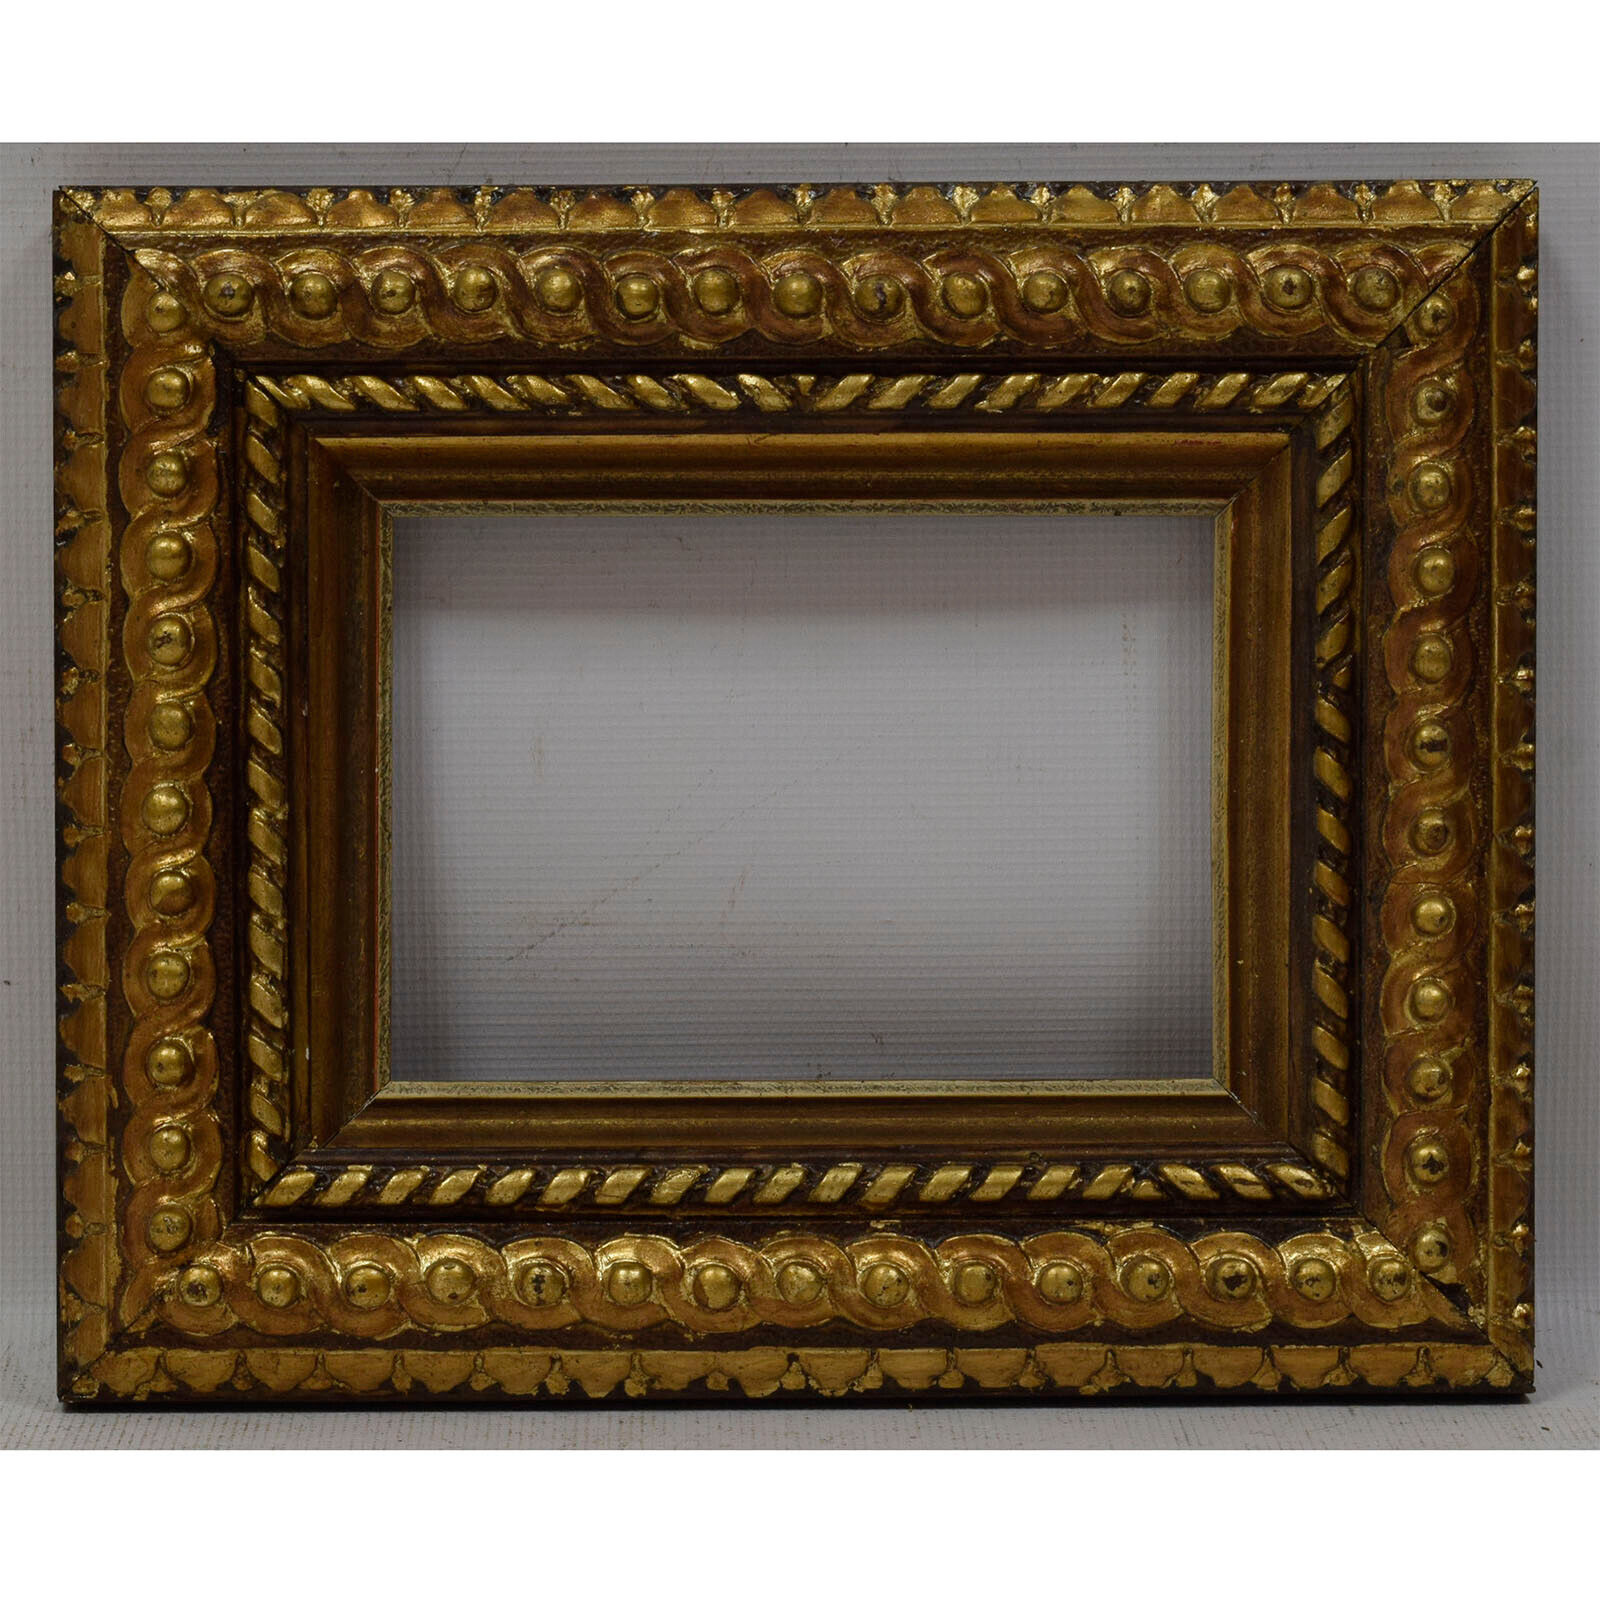 Ca. 1900 Old wooden frame decorative with metal leaf Internal: 8.6x6.1 in